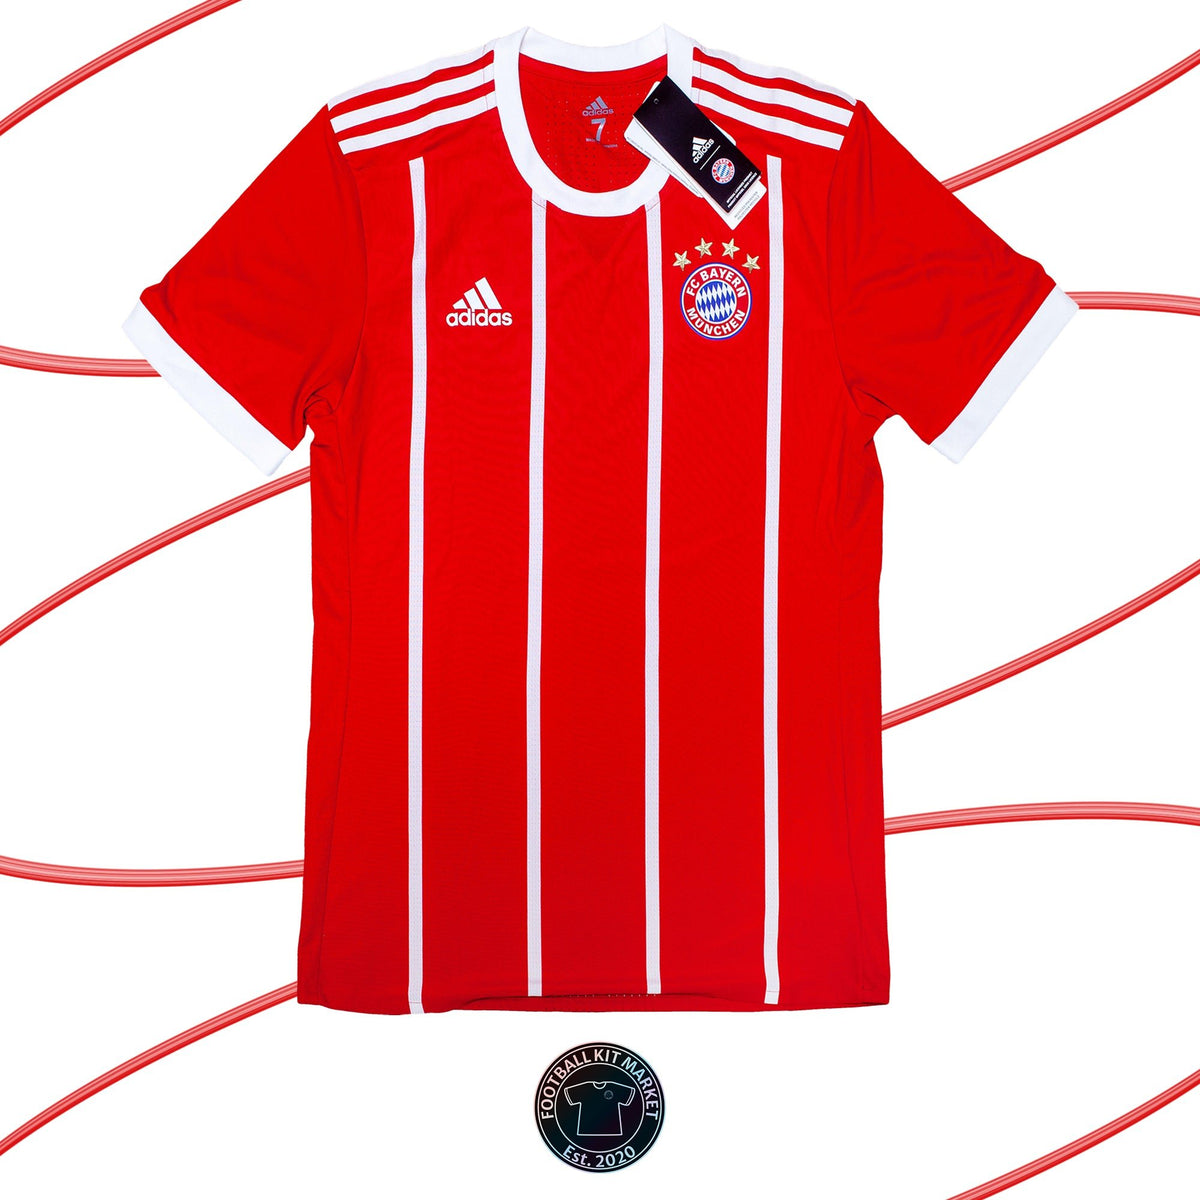 Genuine BAYERN MUNICH Home Shirt (2017-2018) - ADIDAS (Size 7 Player Issue - M/L) - Product Image from Football Kit Market